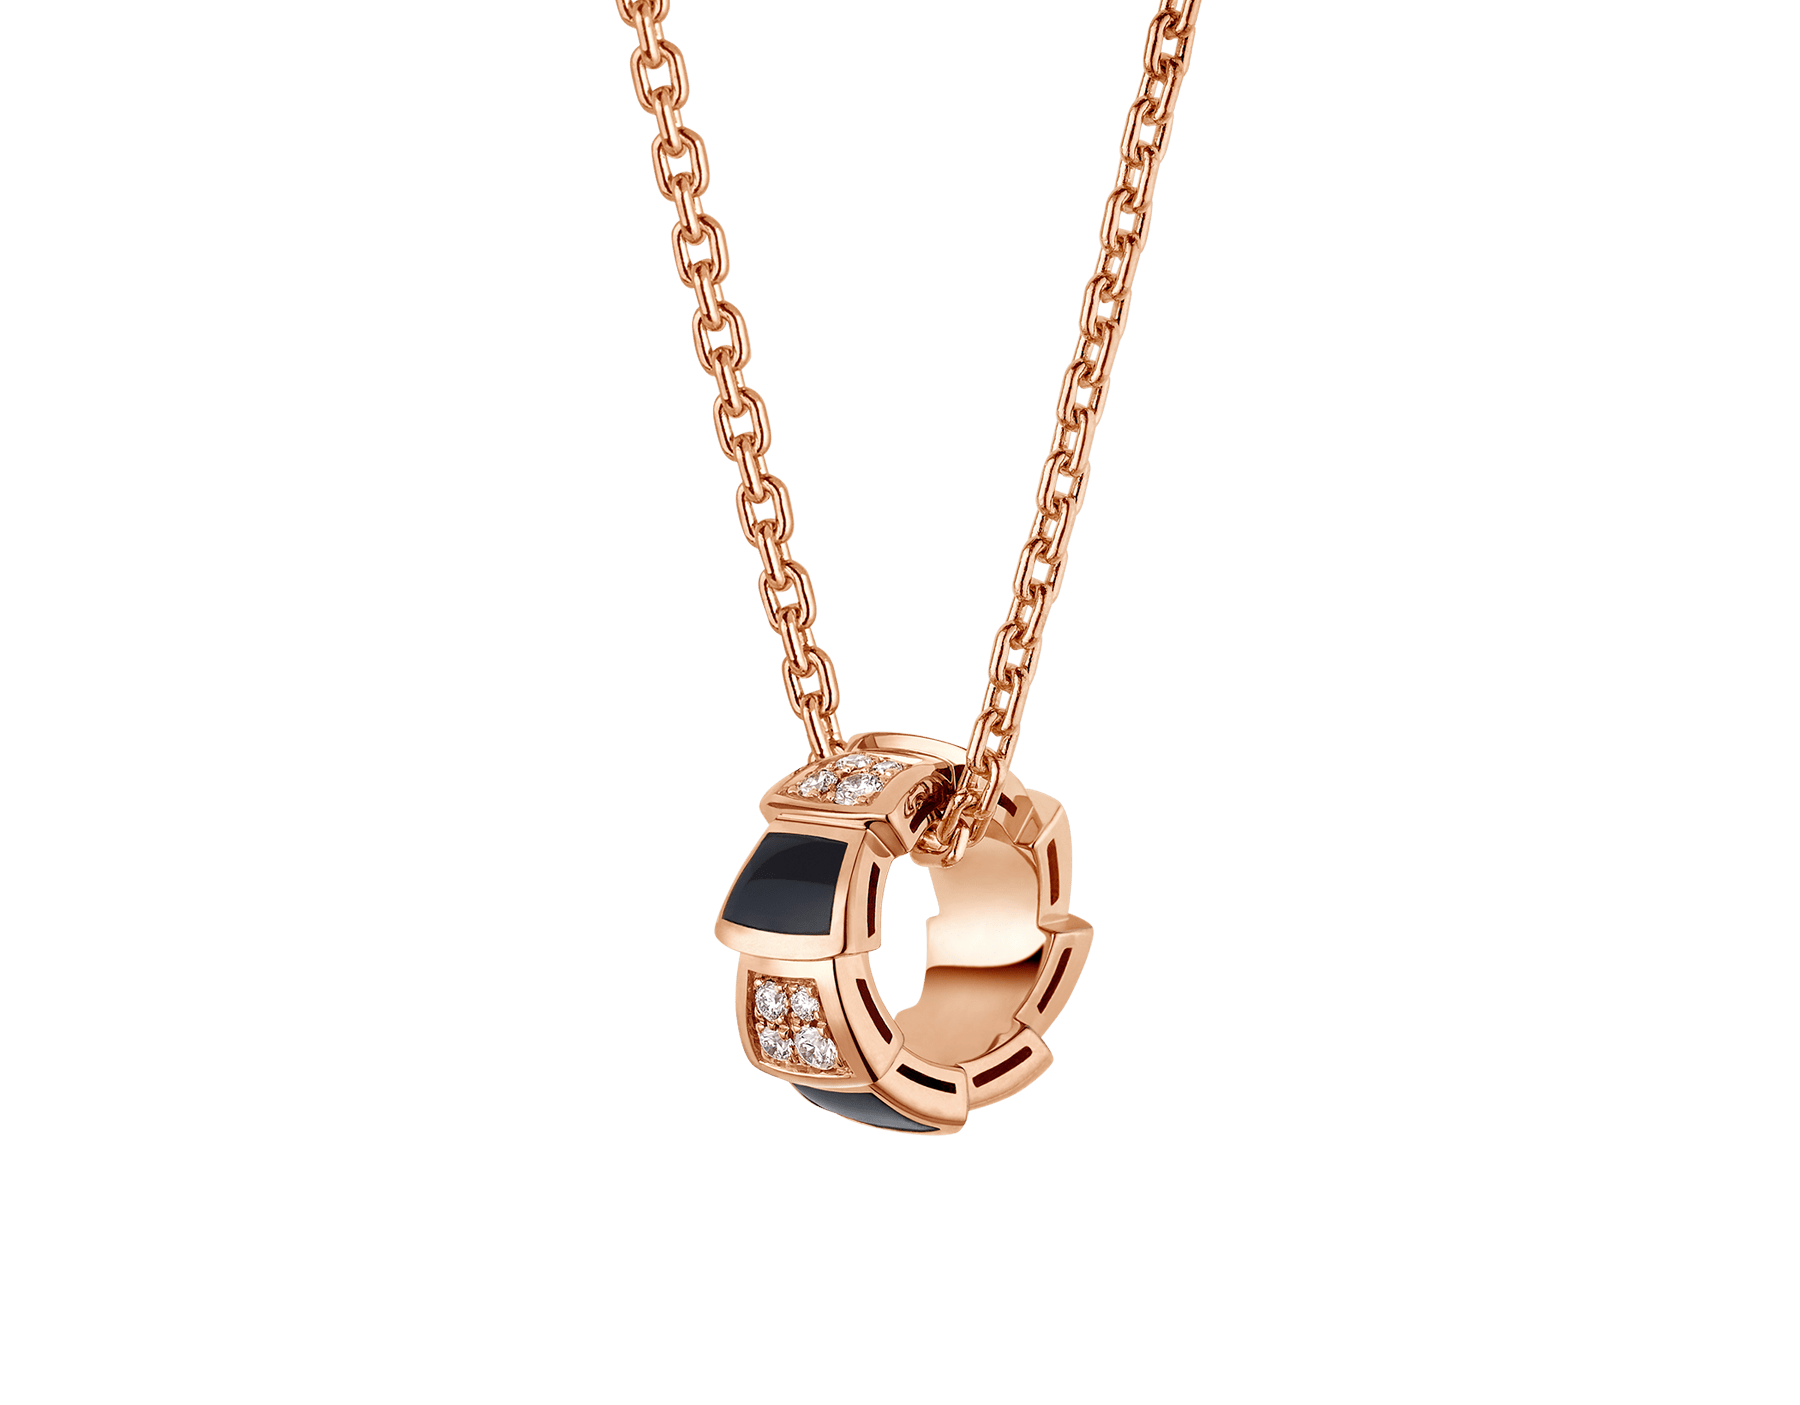 Wholesale OEM/ODM Jewelry Custom design jewelry 18 kt rose gold necklace set with onyx elements and pavé diamonds on the pendant